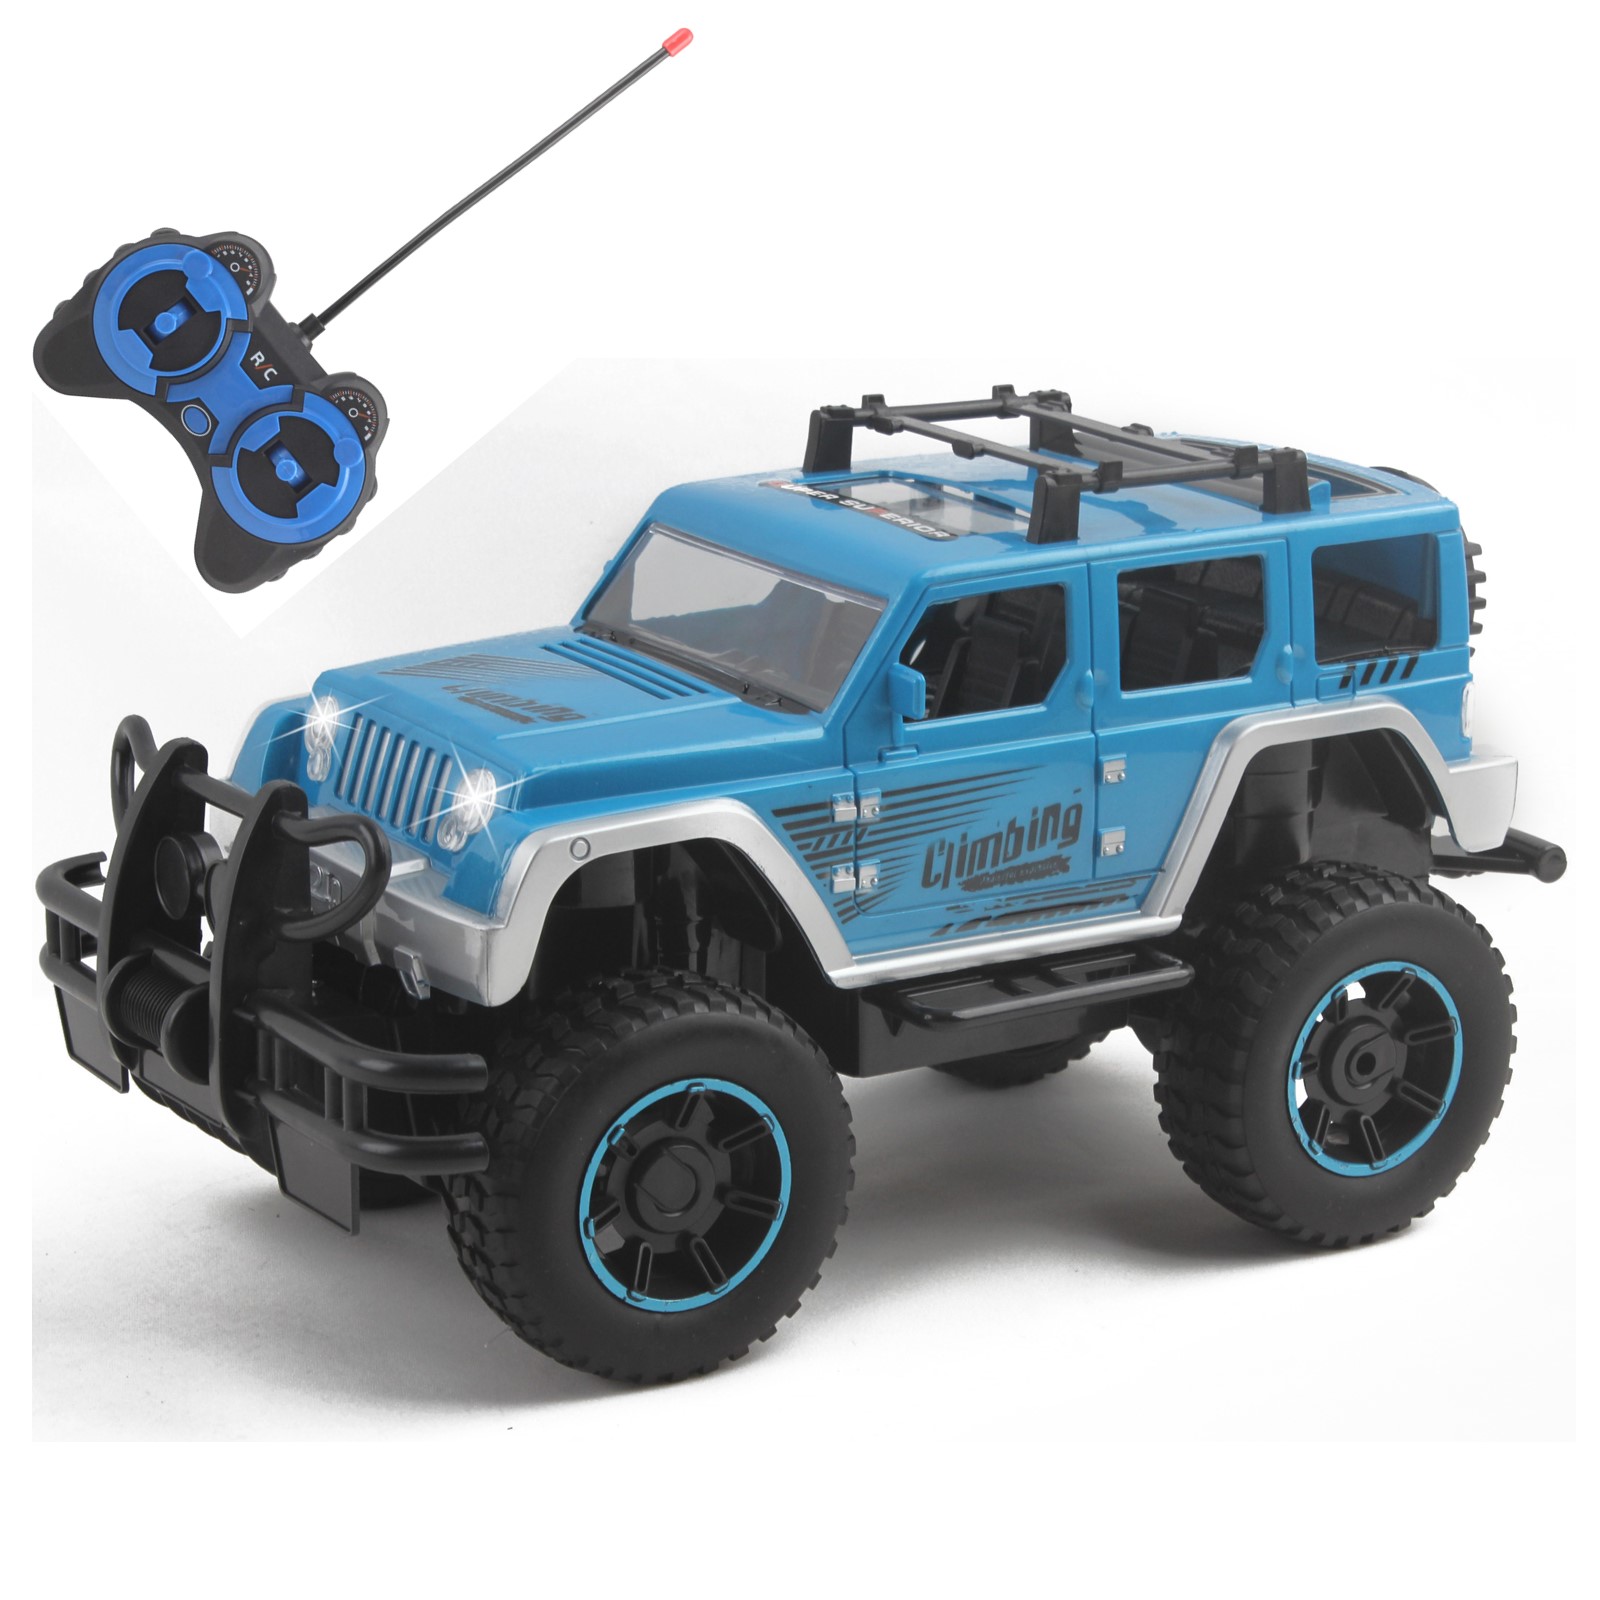 Vokodo RC Truck 12 Inch 1:12 Scale With LED Headlights Big Tires Full Function Off-Road SUV Remote Control Indoor Outdoor Car Ready To Run Electric Kids Toy Vehicle Great Gift Children Boy Girl (Blue)